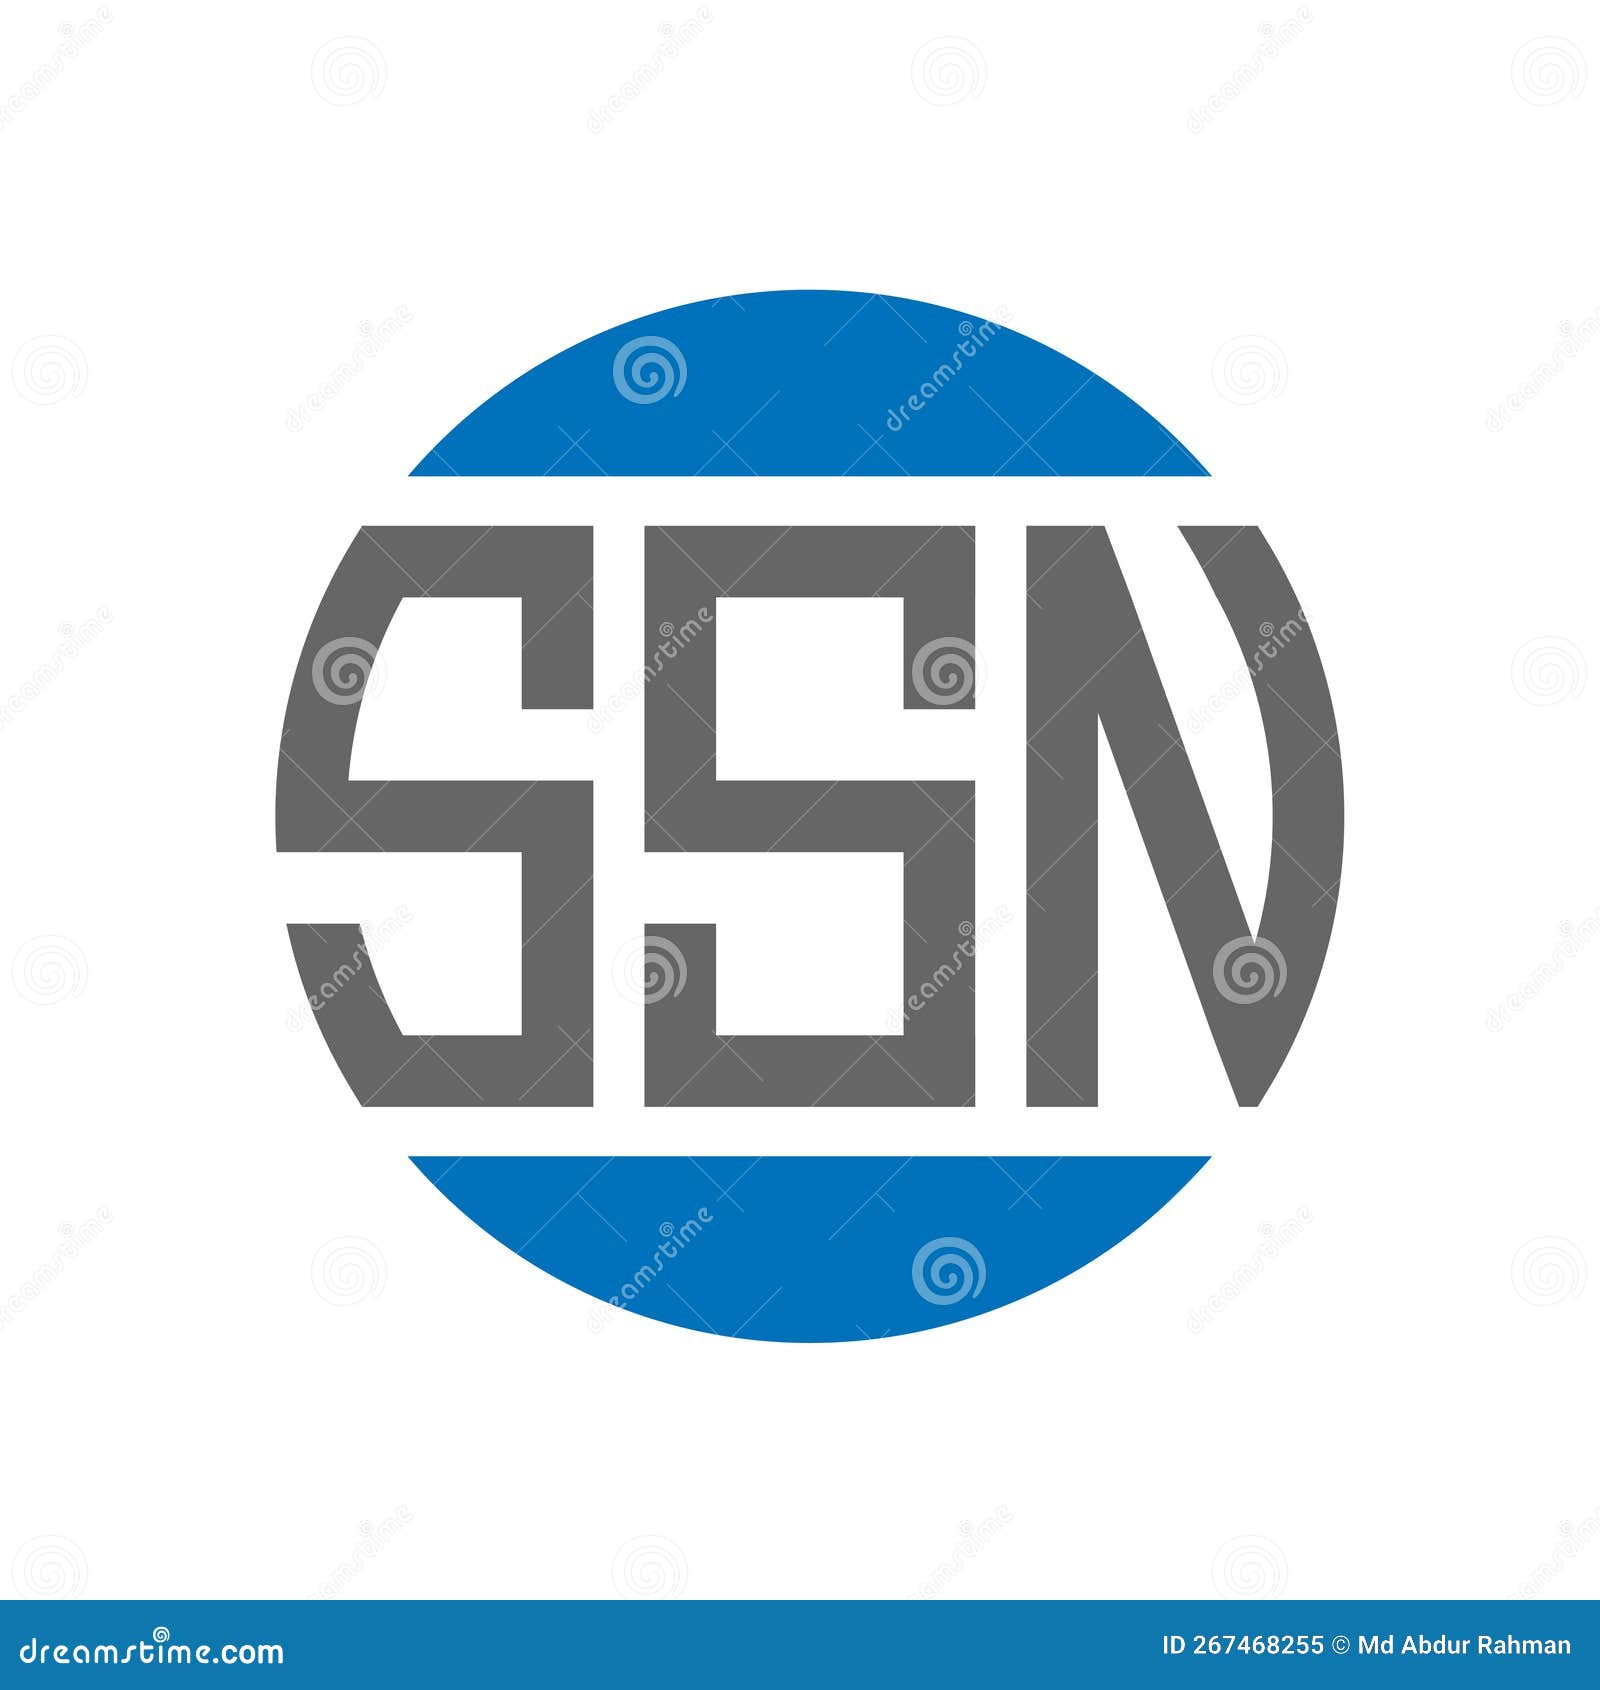 ssn letter logo  on white background. ssn creative initials circle logo concept. ssn letter 